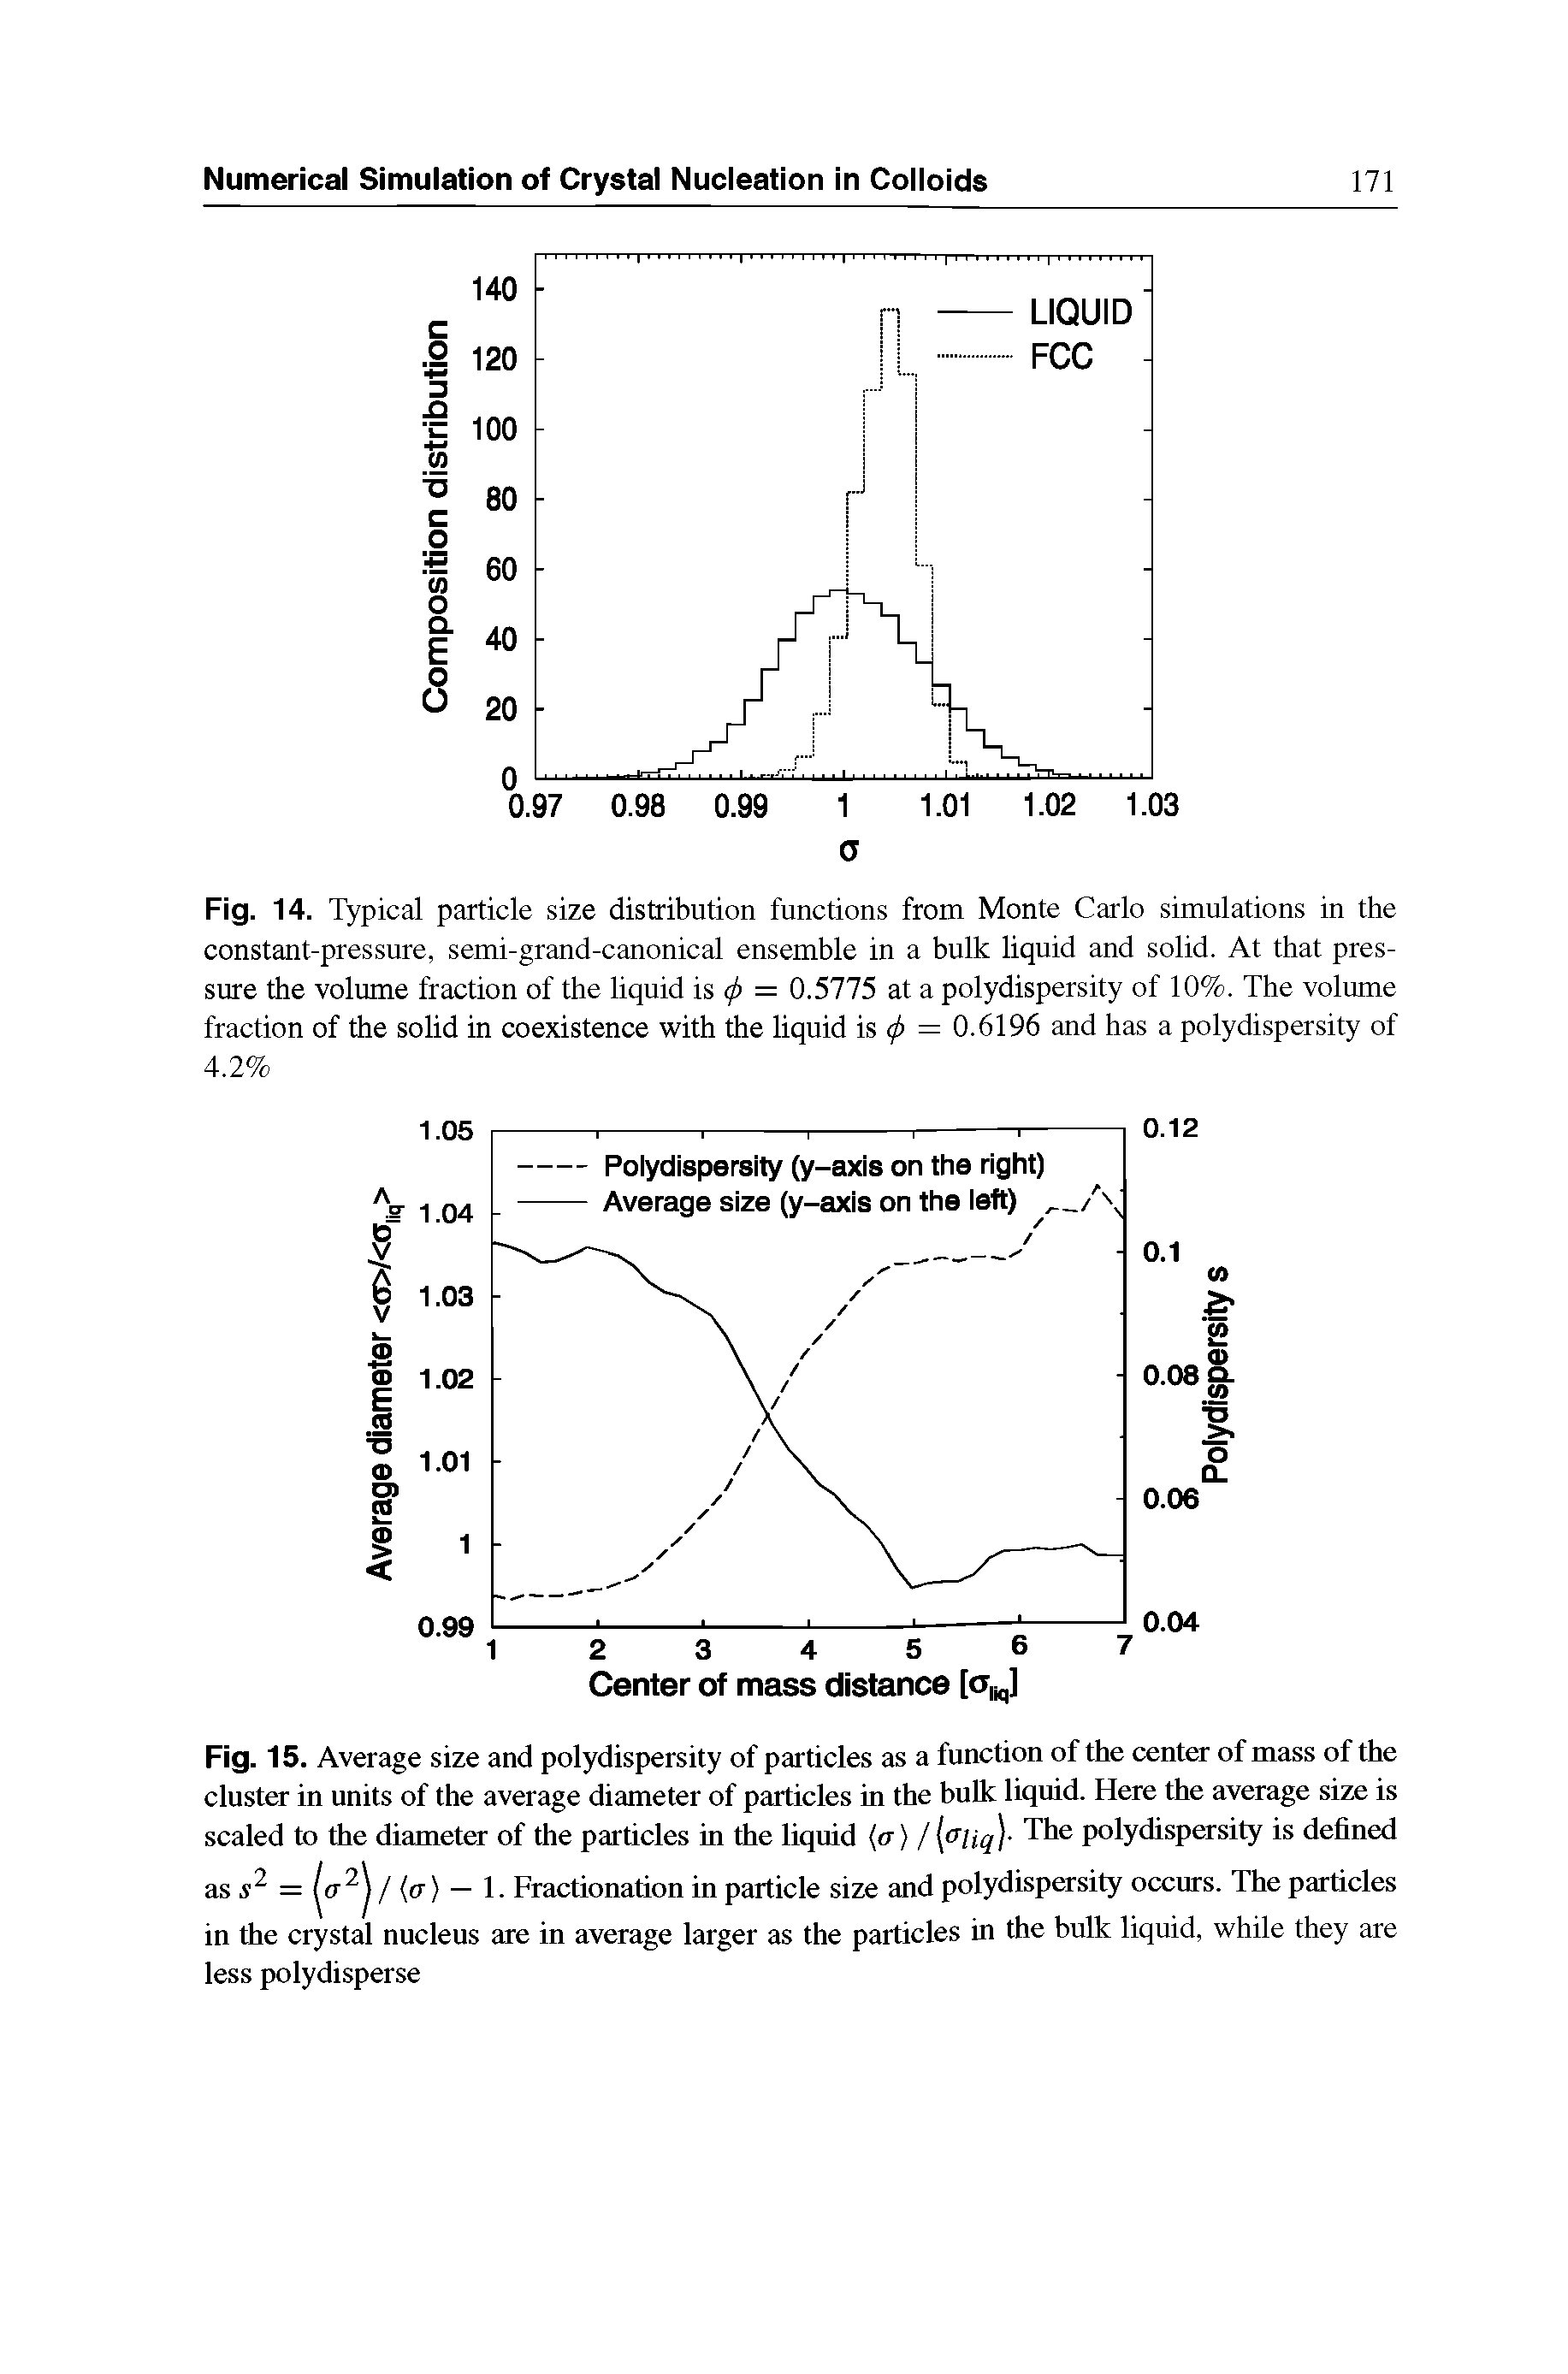 Fig. 15. Average size and polydispersity of particles as a function of the center of mass of the cluster in units of the average diameter of particles in the bulk liquid. Here the average size is scaled to the diameter of the particles in the liquid a) / < Hq)- The polydispersity is defined...